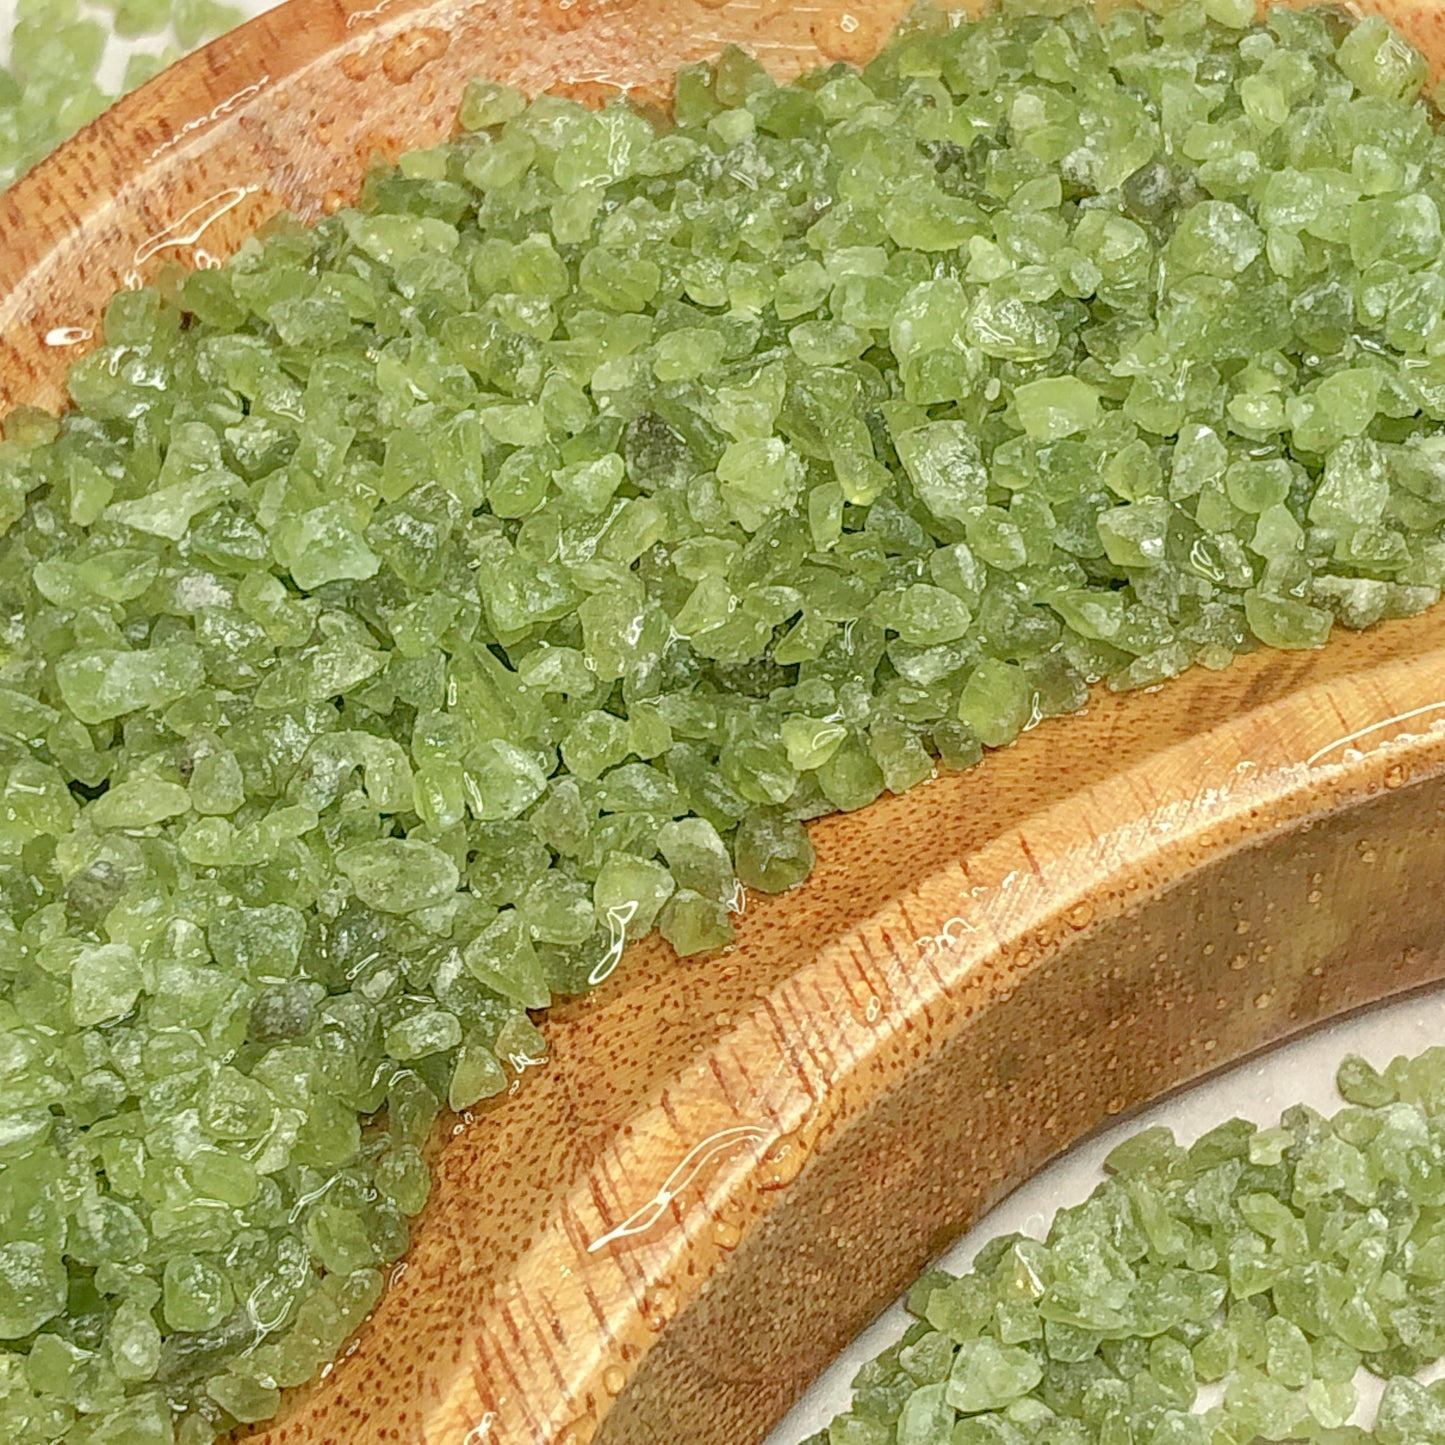 Crushed RARE Gemmy Green Idocrase (Grade A+) from Kenya, Coarse Crush, Gravel Size (4mm - 2mm) for Metaphysical Projects, Resin Art, Inlay or Jewelry